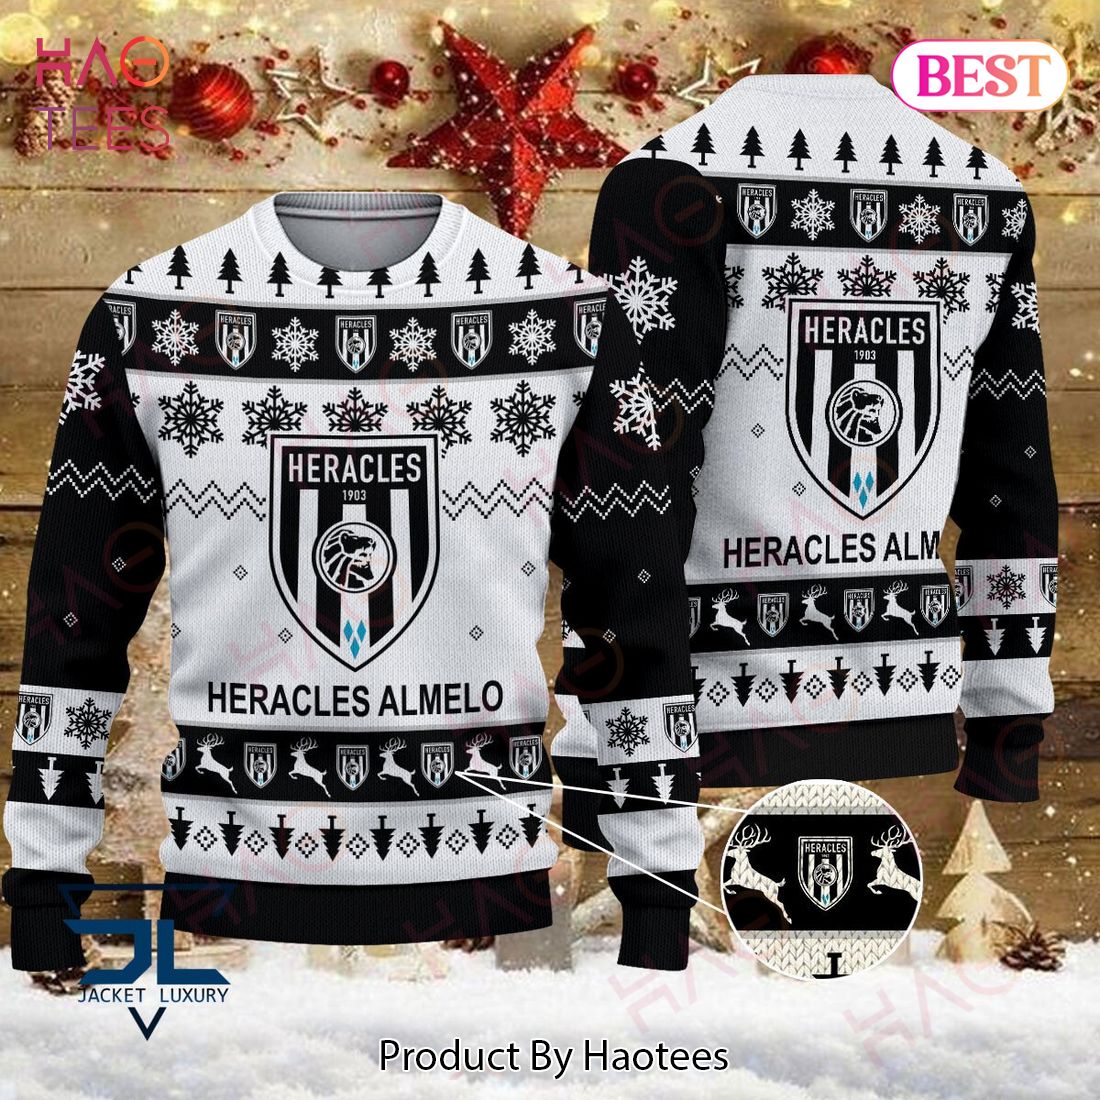 BEST Heracles Almelo Black Mix White Luxury Brand Sweater Limited Edition